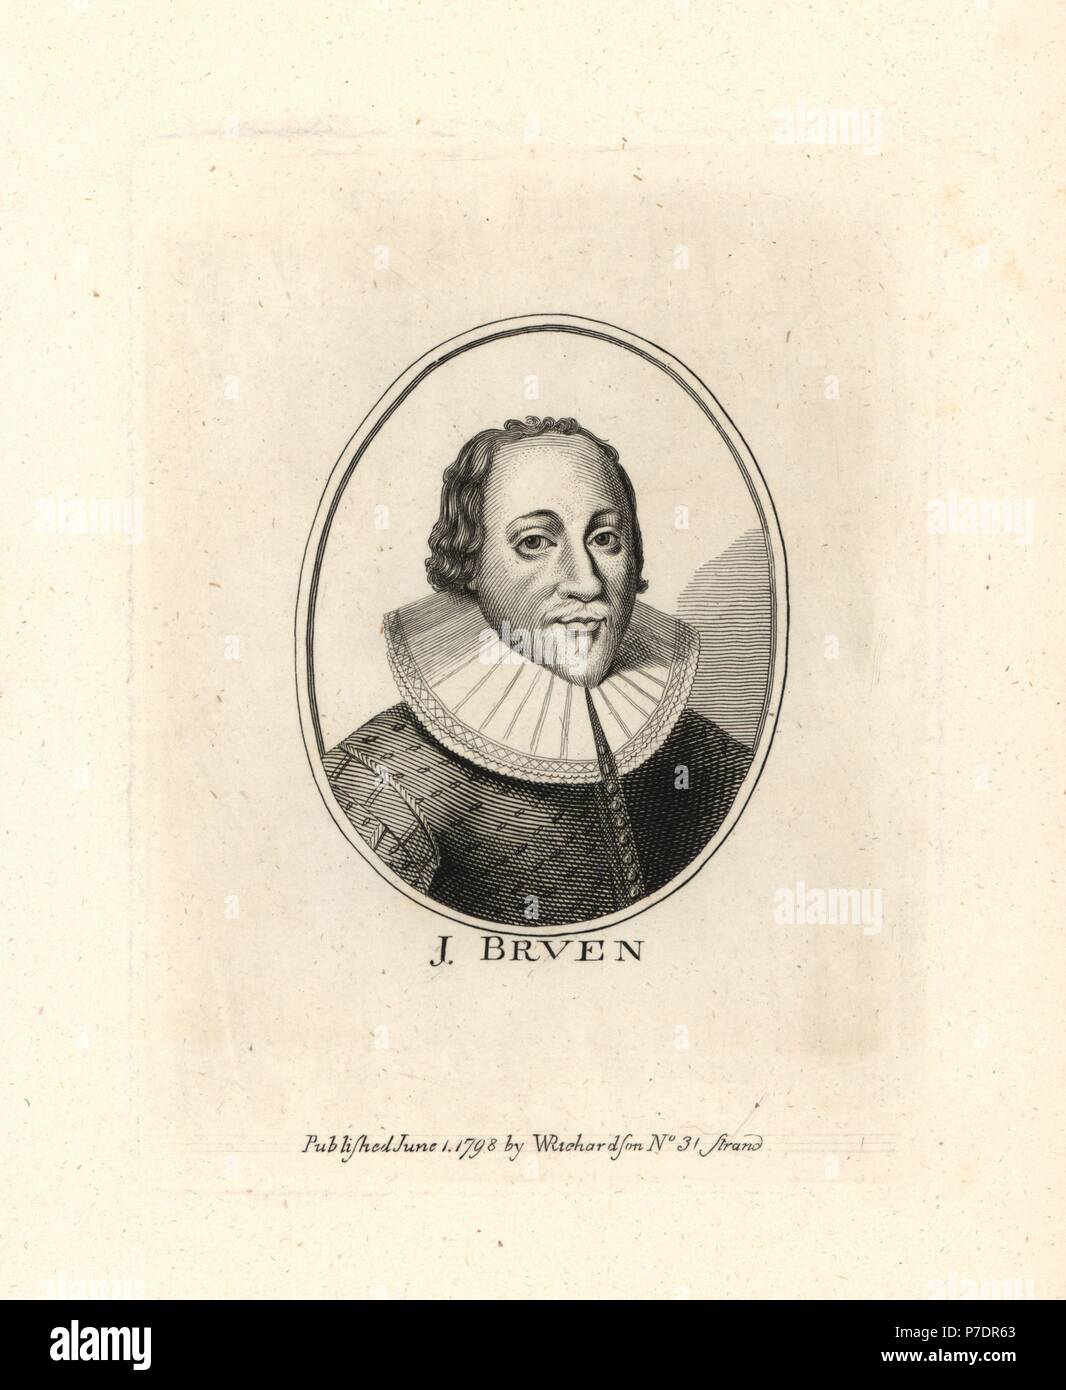 John Bruen of Stapleford, educated at Alban Hall, Puritan gentleman-commoner, died 1625. Copperplate engraving from William Richardson's Portraits Illustrating Granger's Biographical History of England, London, 1792–1812. James Granger (1723–1776) was an English clergyman, biographer, and print collector. Stock Photo